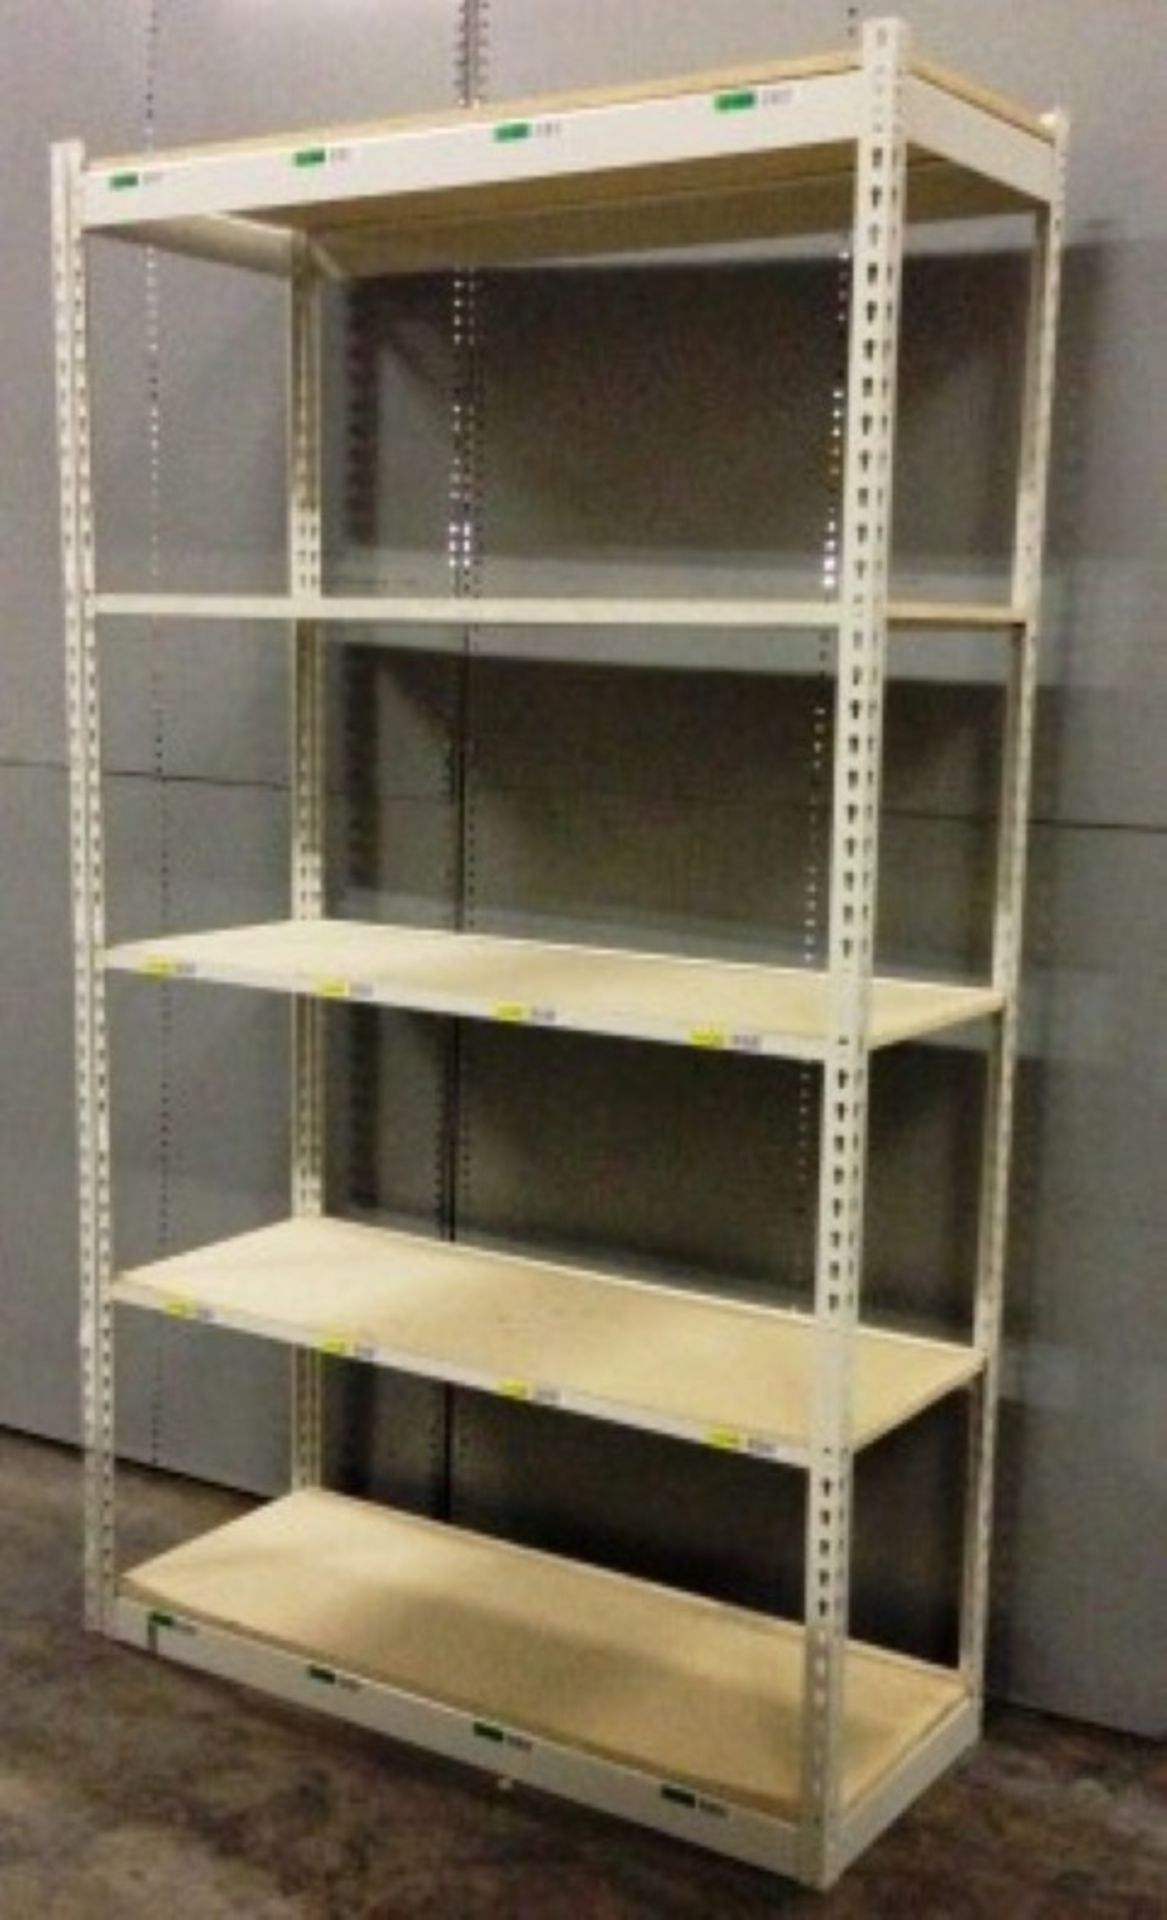 ONE LOT OF 10 SECTIONS OF RIVETIER INDUSTRIAL SHELVING,  EACH SIZE 18"D X 48"W X 84"H, COLOR: